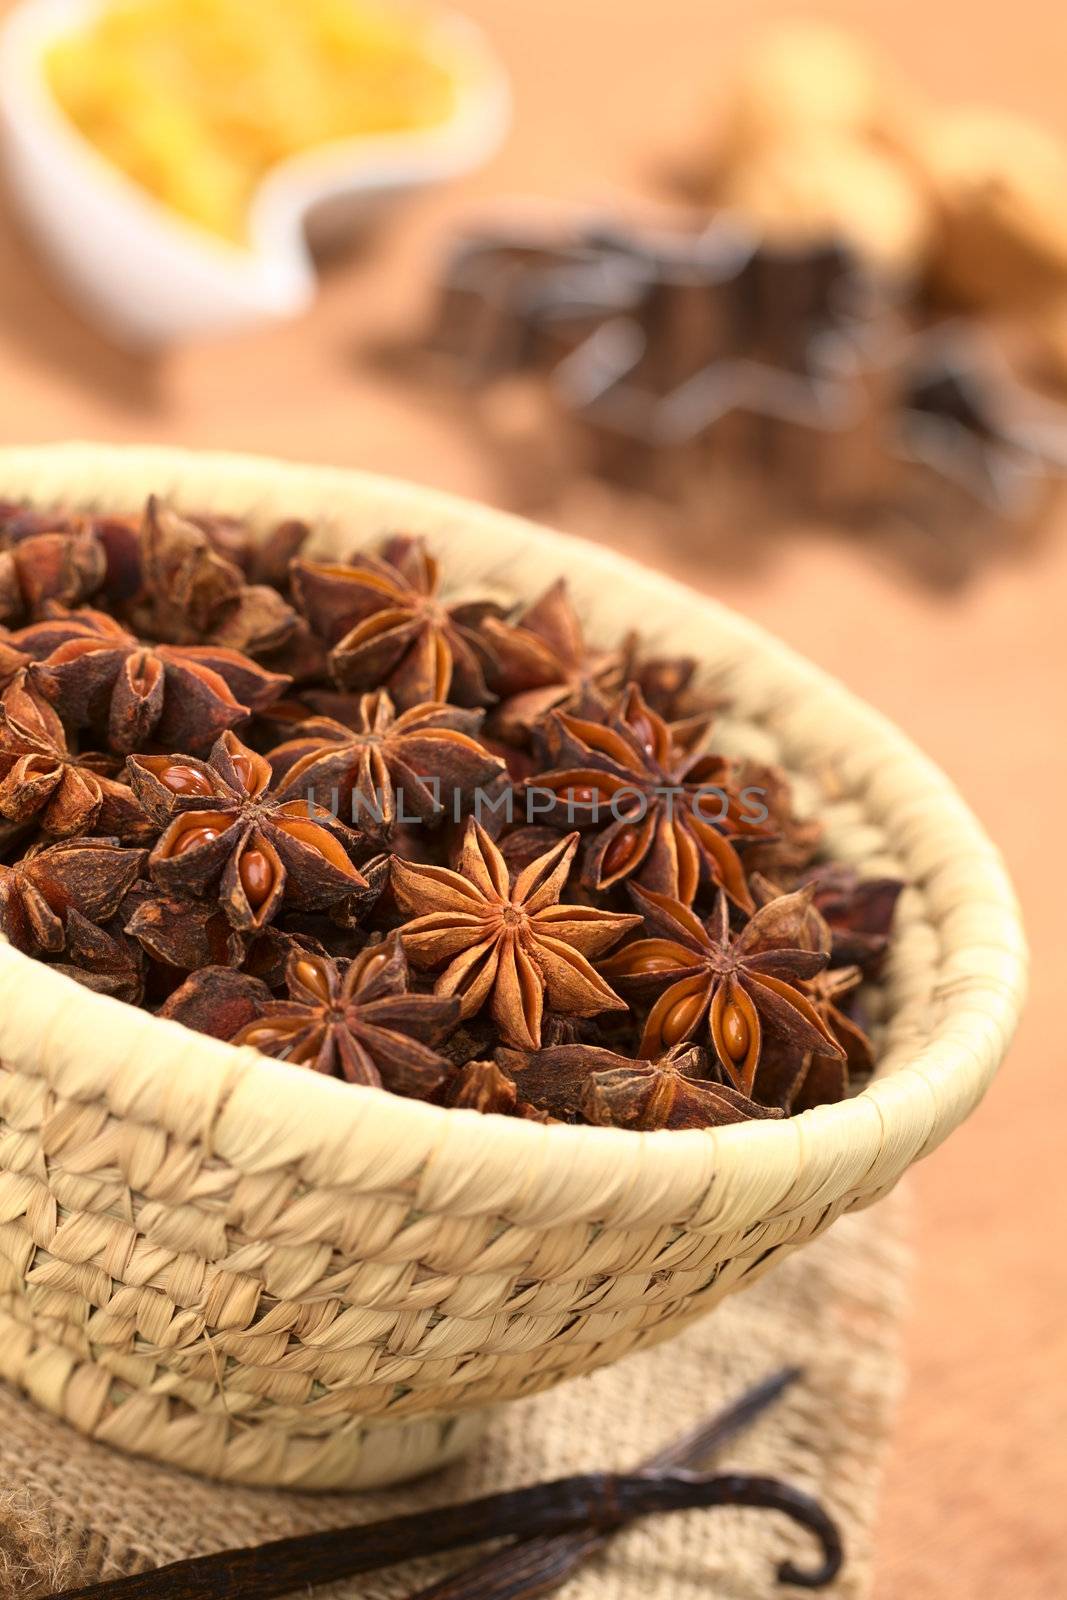 Star anise in small woven basket with vanilla in front and other baking ingredients in the back (Selective Focus, Focus one third into the anise)